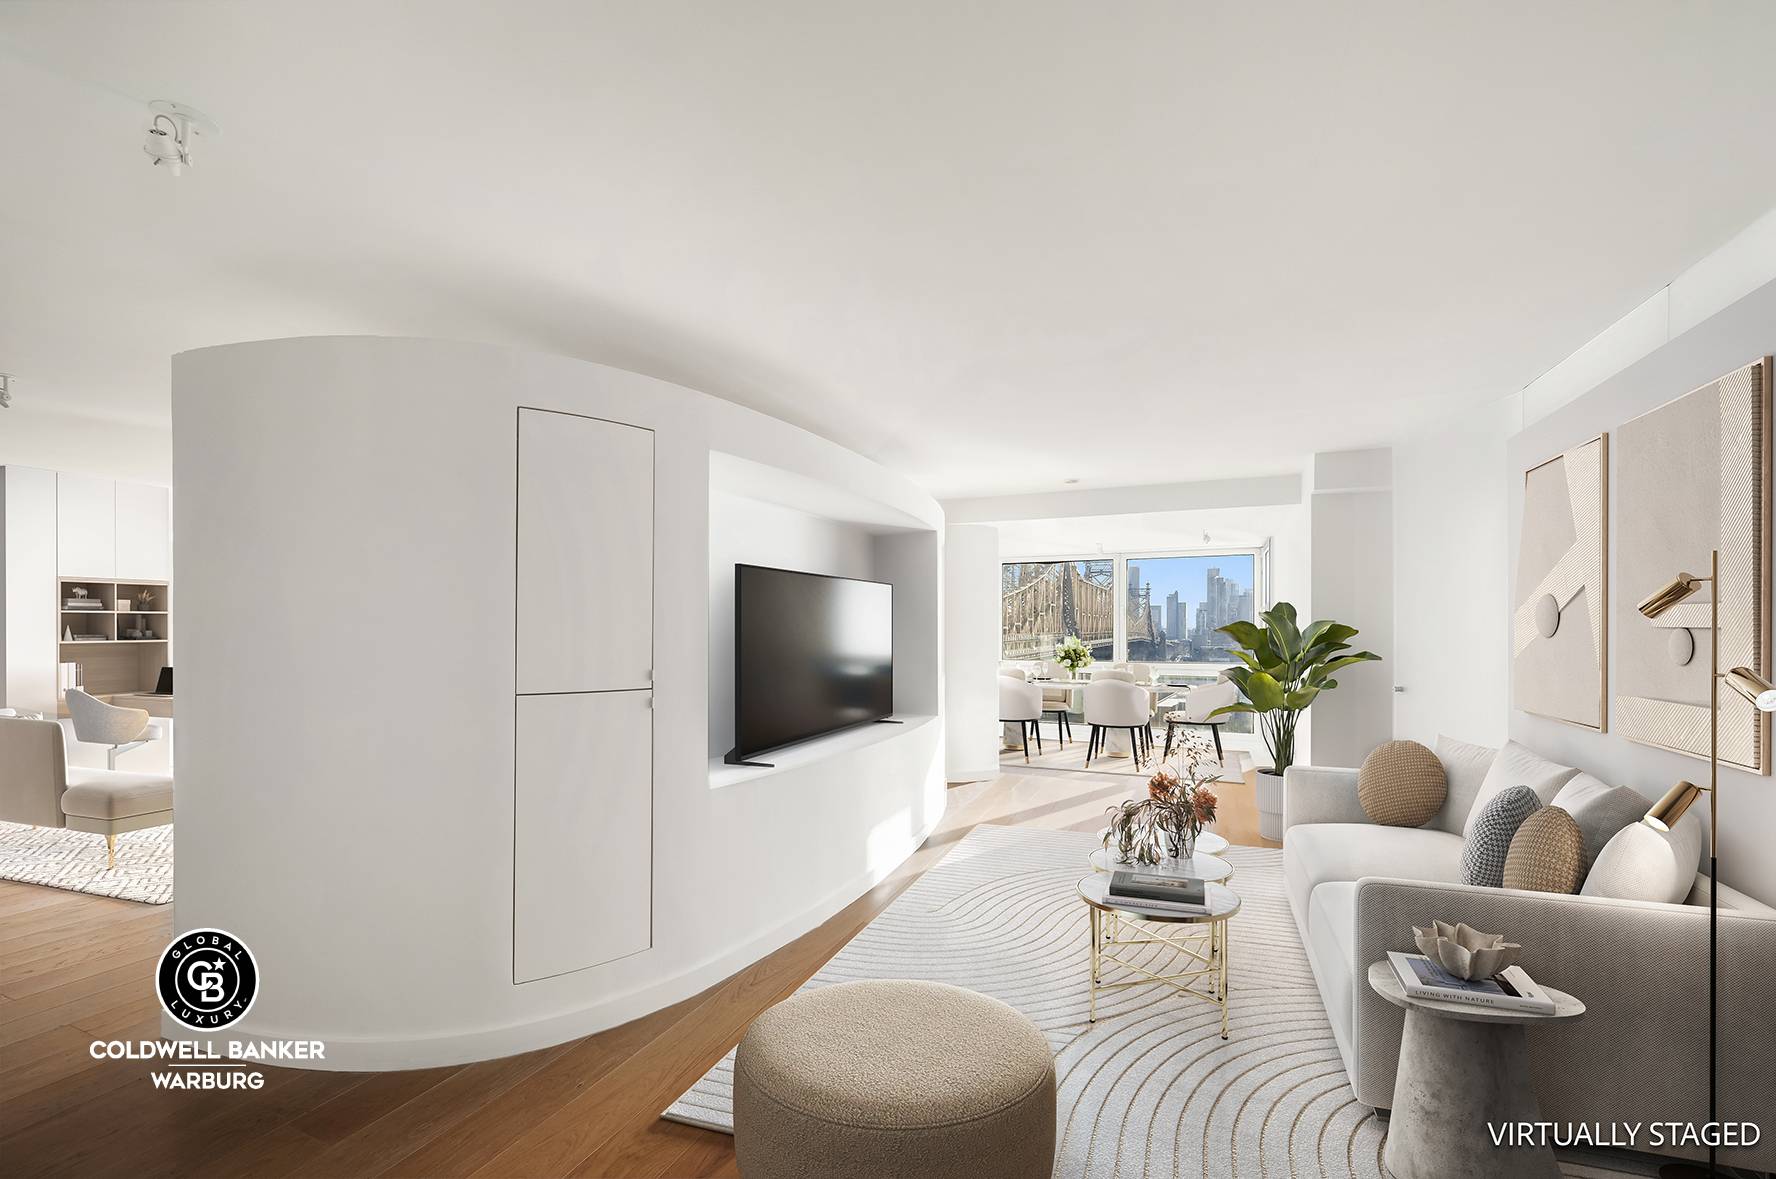 Apartment 16B was ORIGINALLY a TWO BEDROOM and has spectacular, panoramic and unobstructed views overlooking the East River.